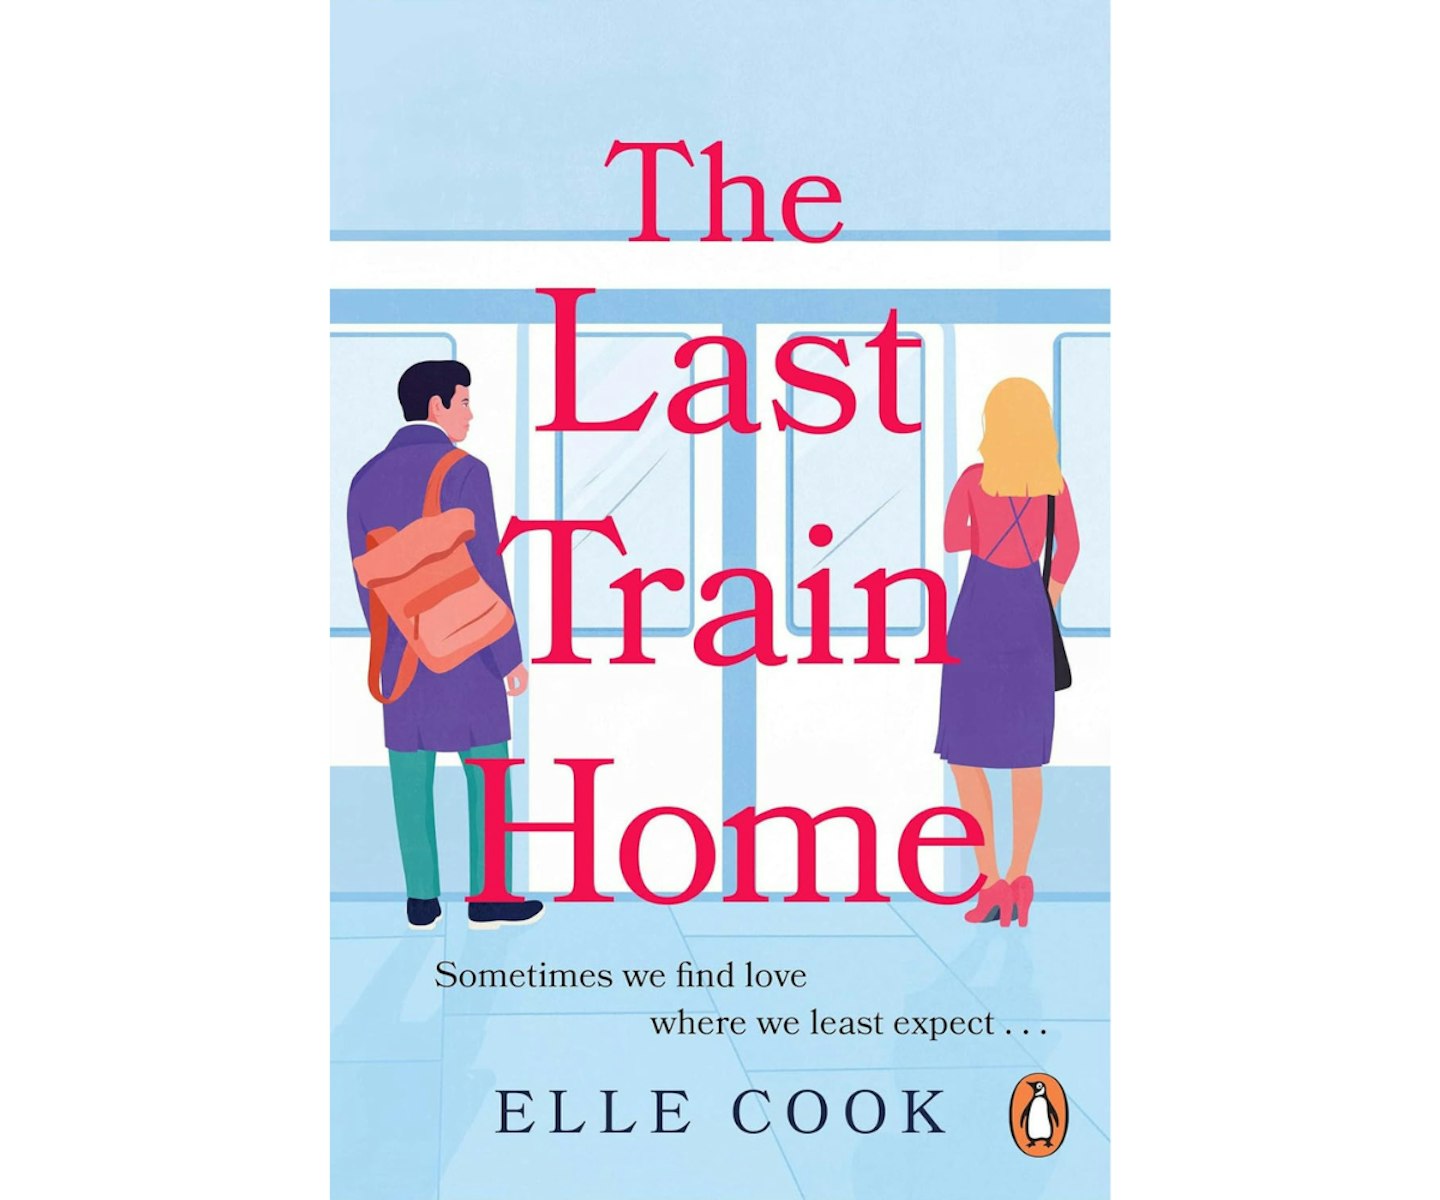 The Last Train Home by Elle Cook